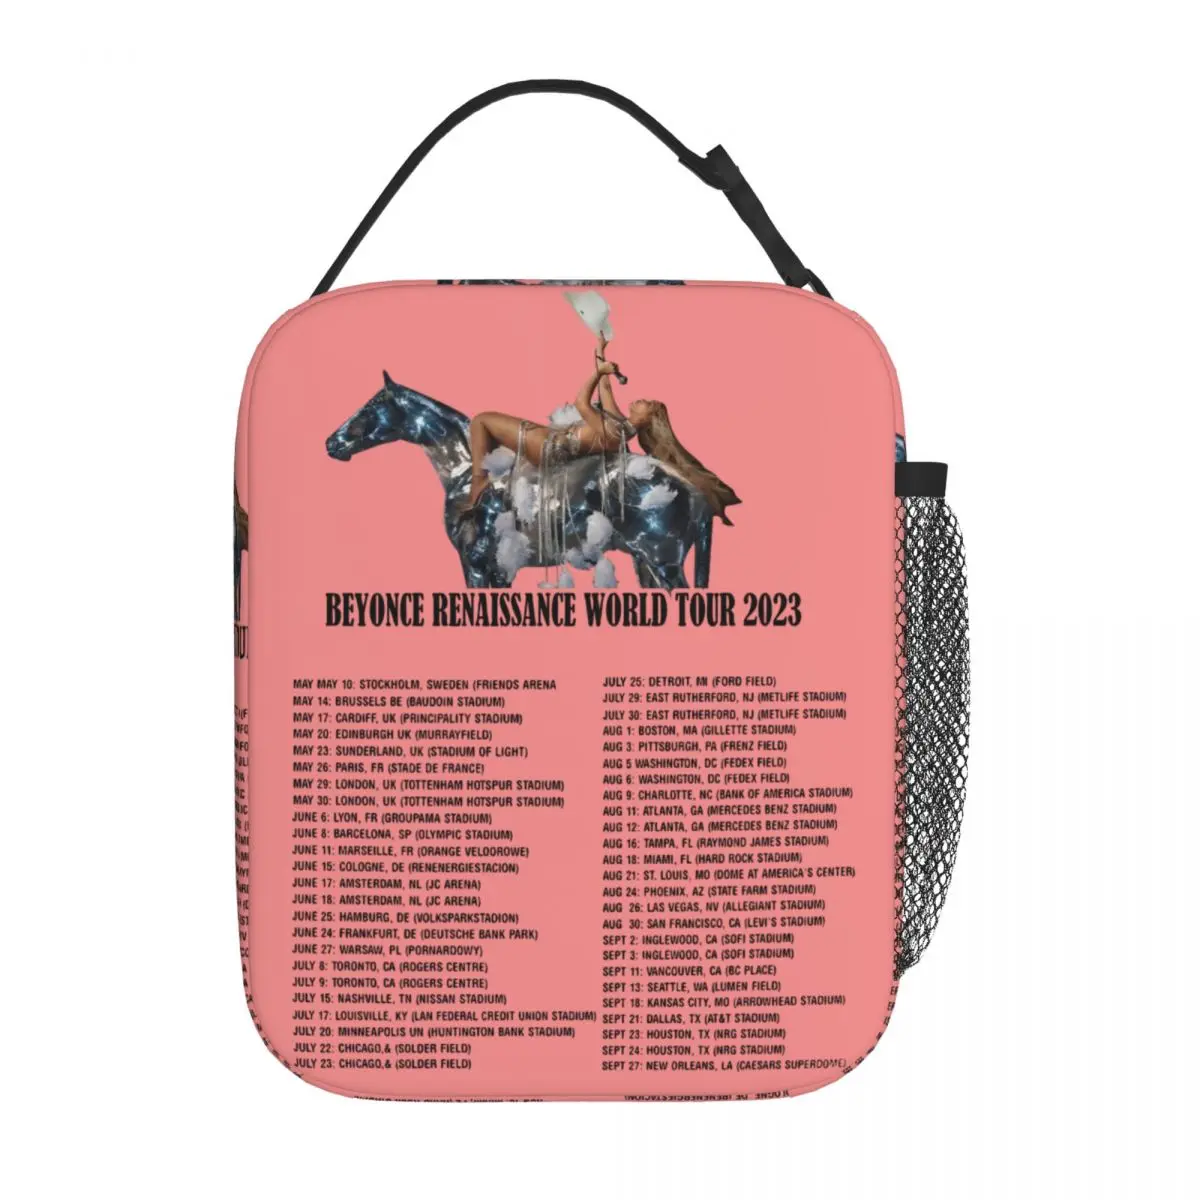 

2023 Beyonce Renaissance Thermal Insulated Lunch Bags Travel World Tour Portable Box for Lunch Thermal Cooler Lunch Box